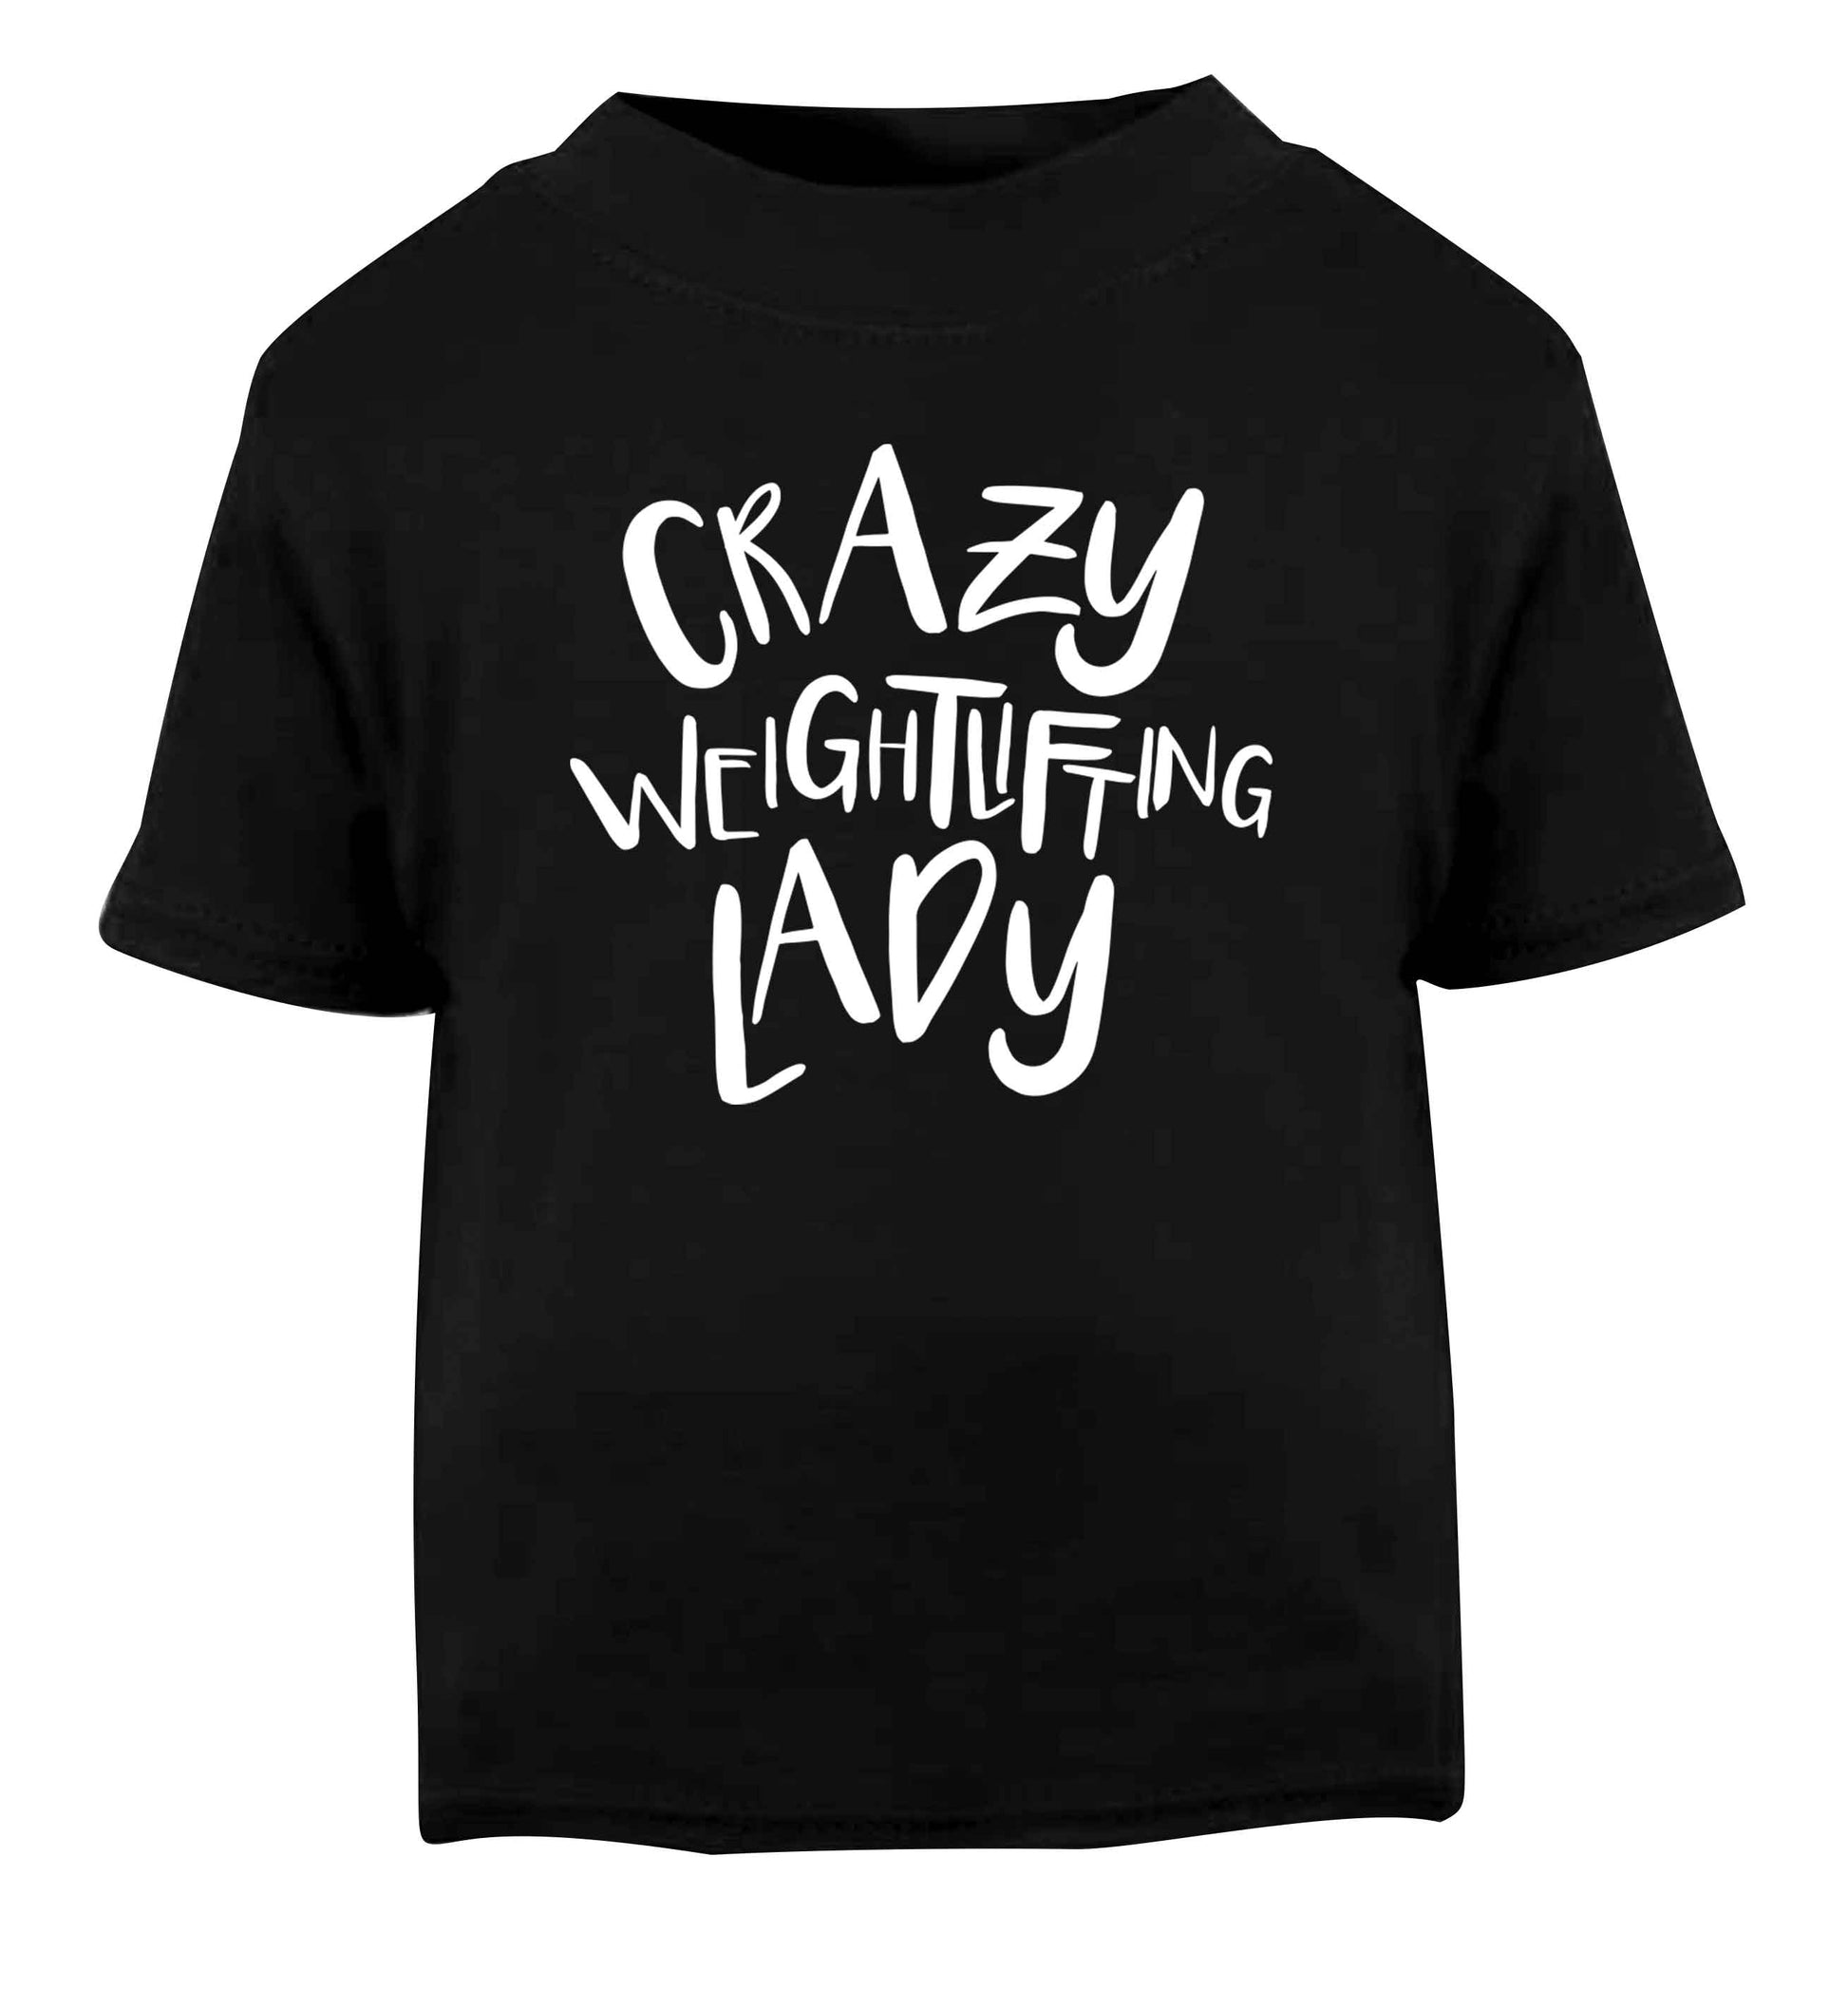 Crazy weightlifting lady Black Baby Toddler Tshirt 2 years